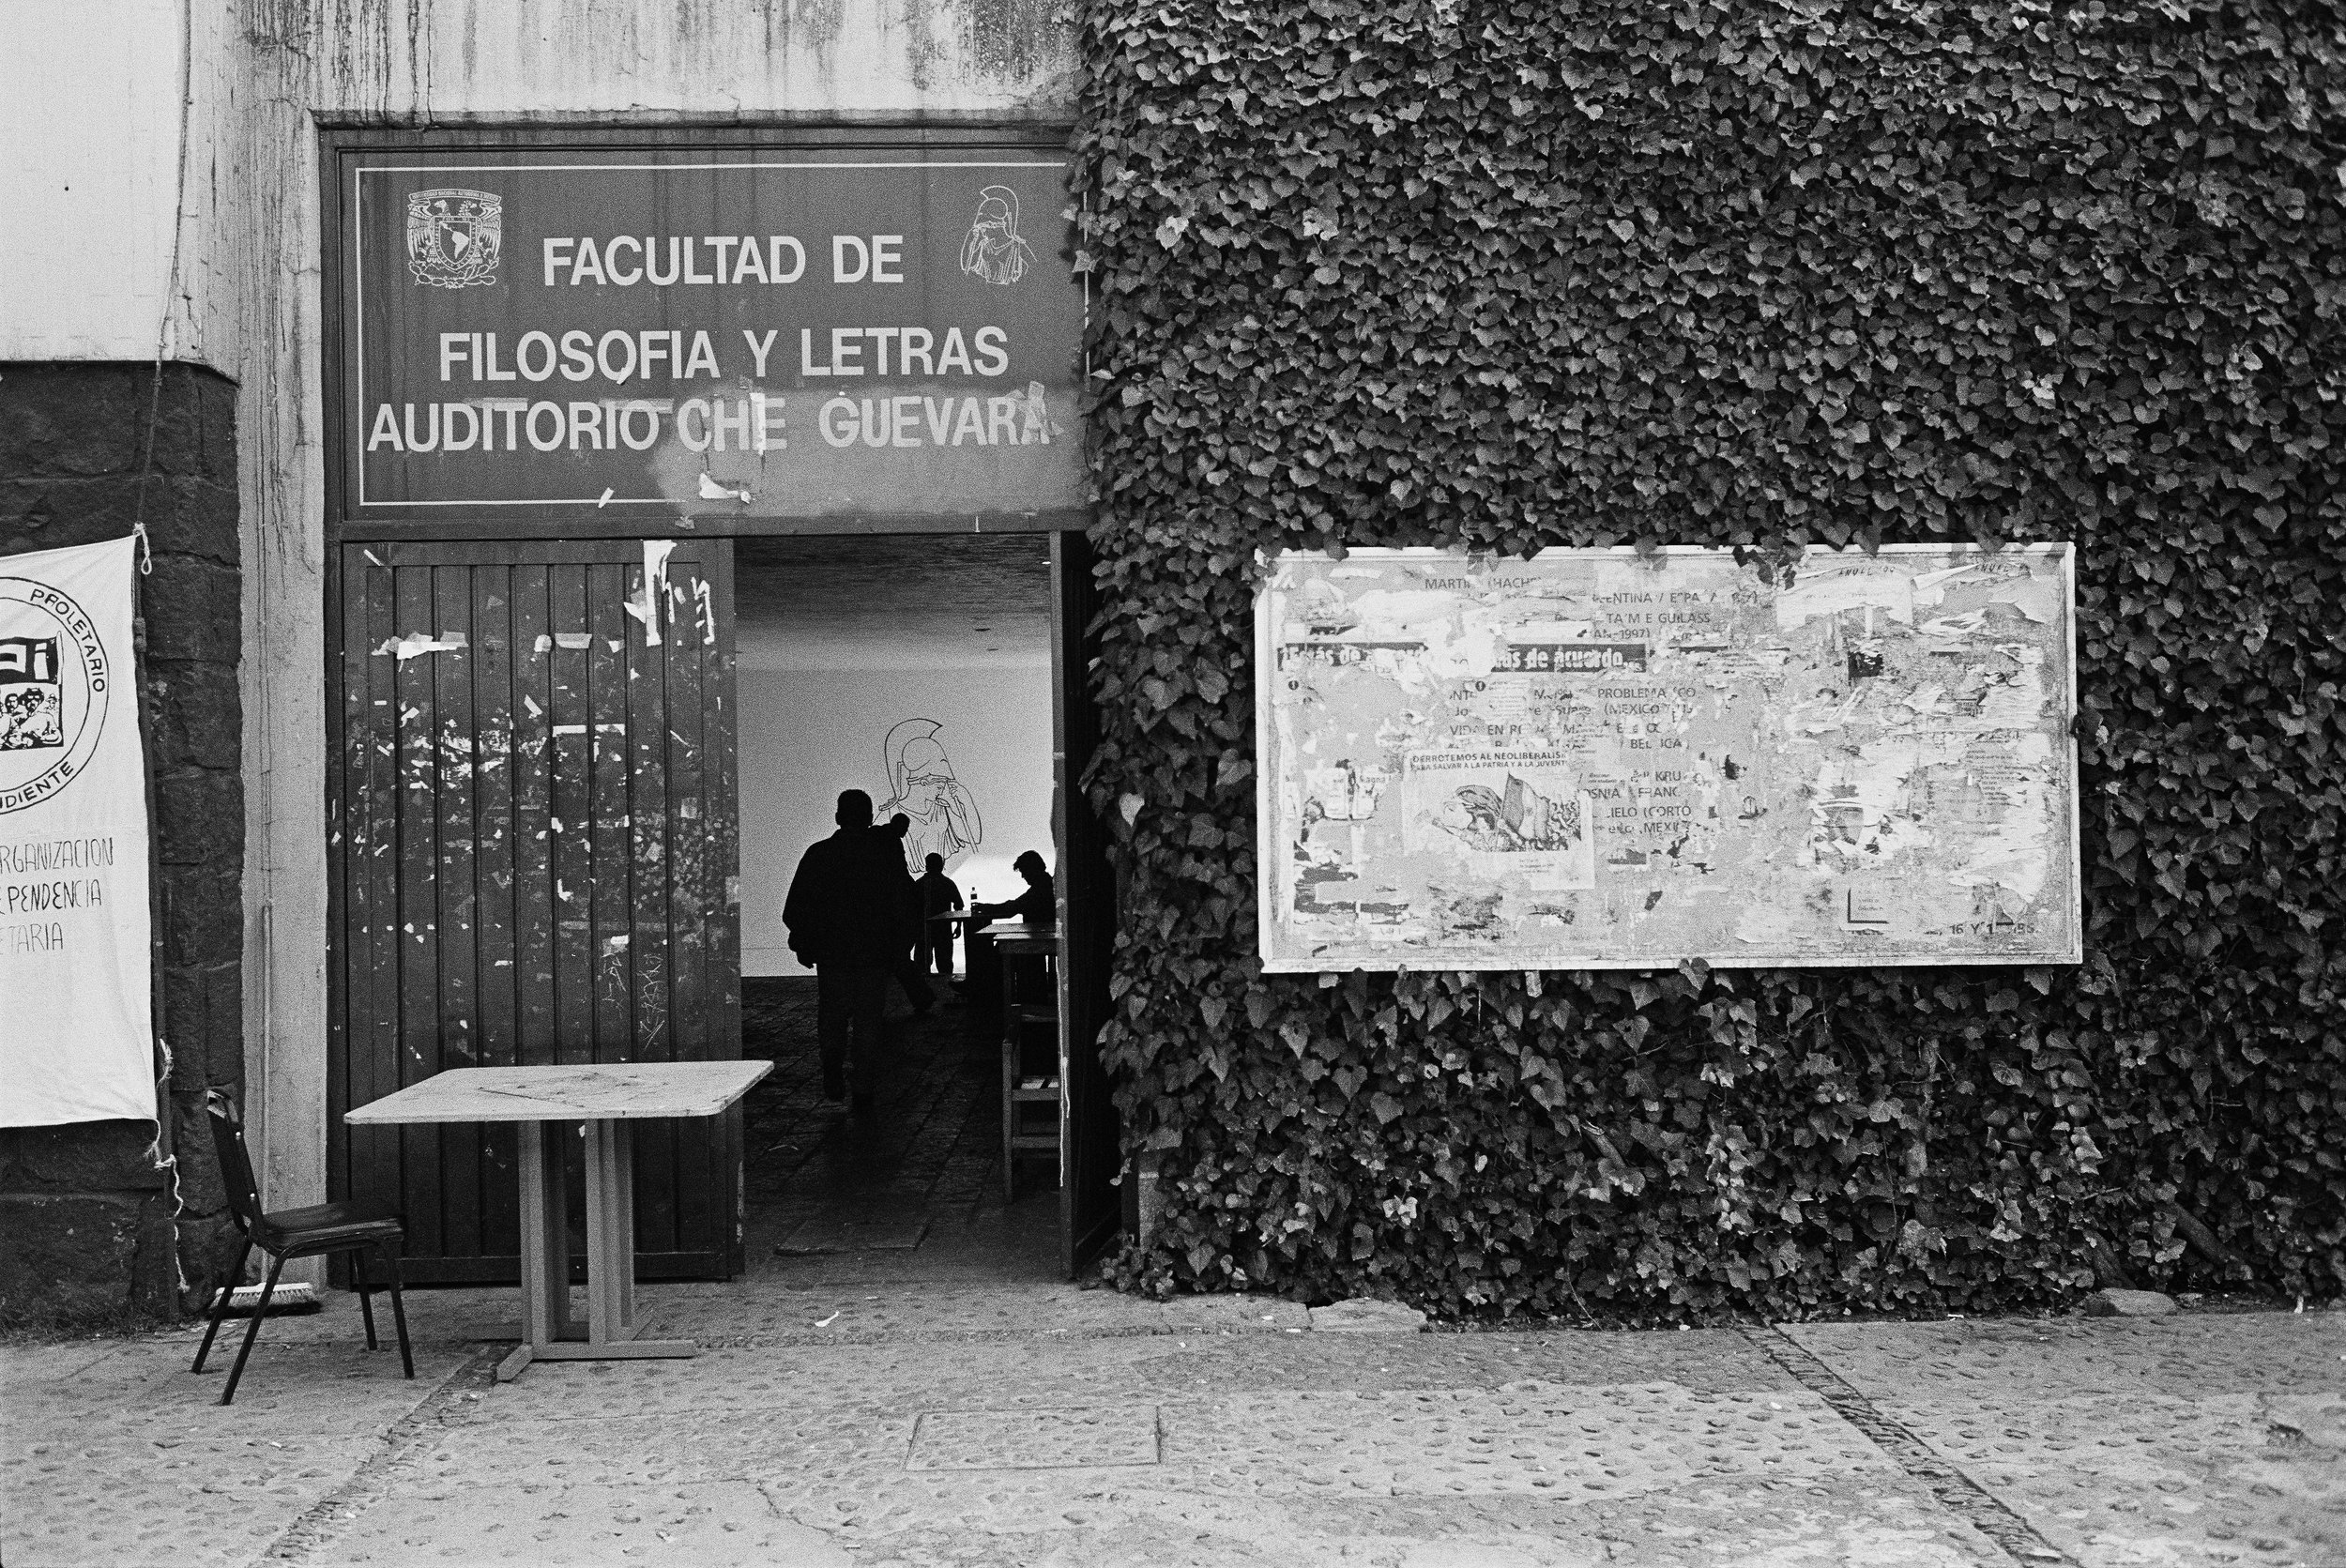  The entire campus of UNAM in Mexico City, Mexico was occupied in 1999-2000, including an auditorium that was renamed after Che Guevara. 